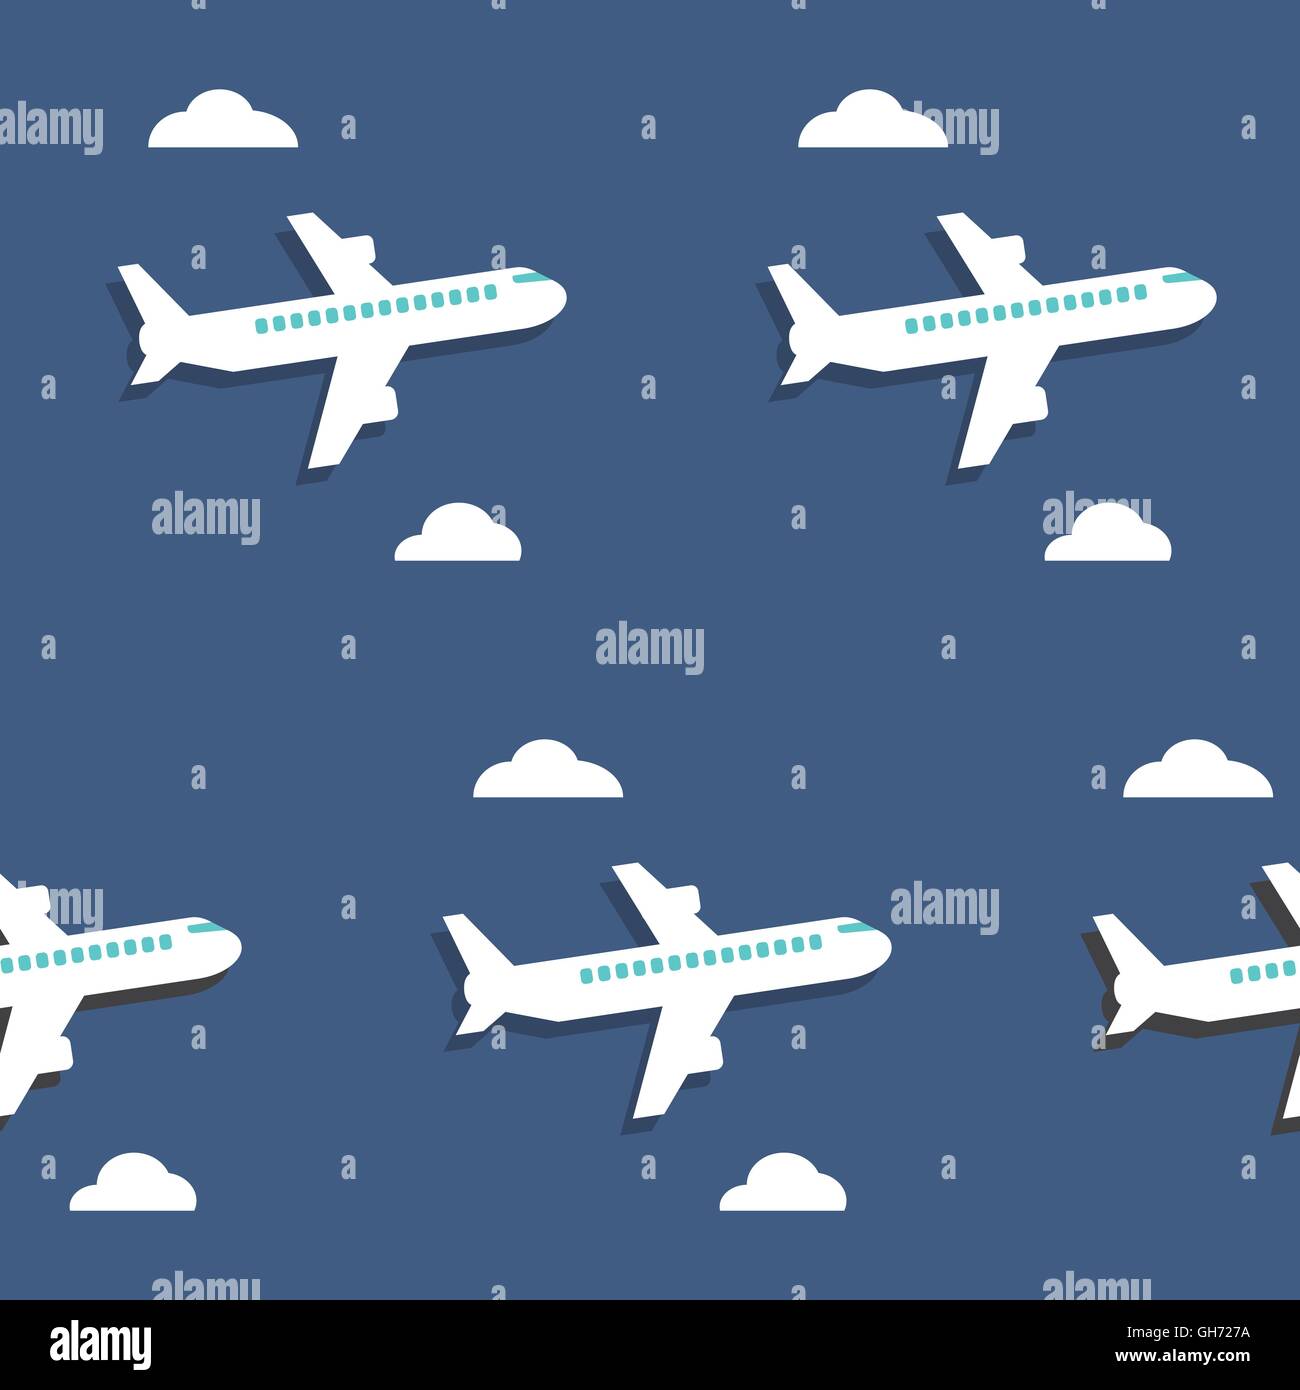 Seamless pattern. Airplanes and clouds over blue background. Vector Illustration Stock Vector